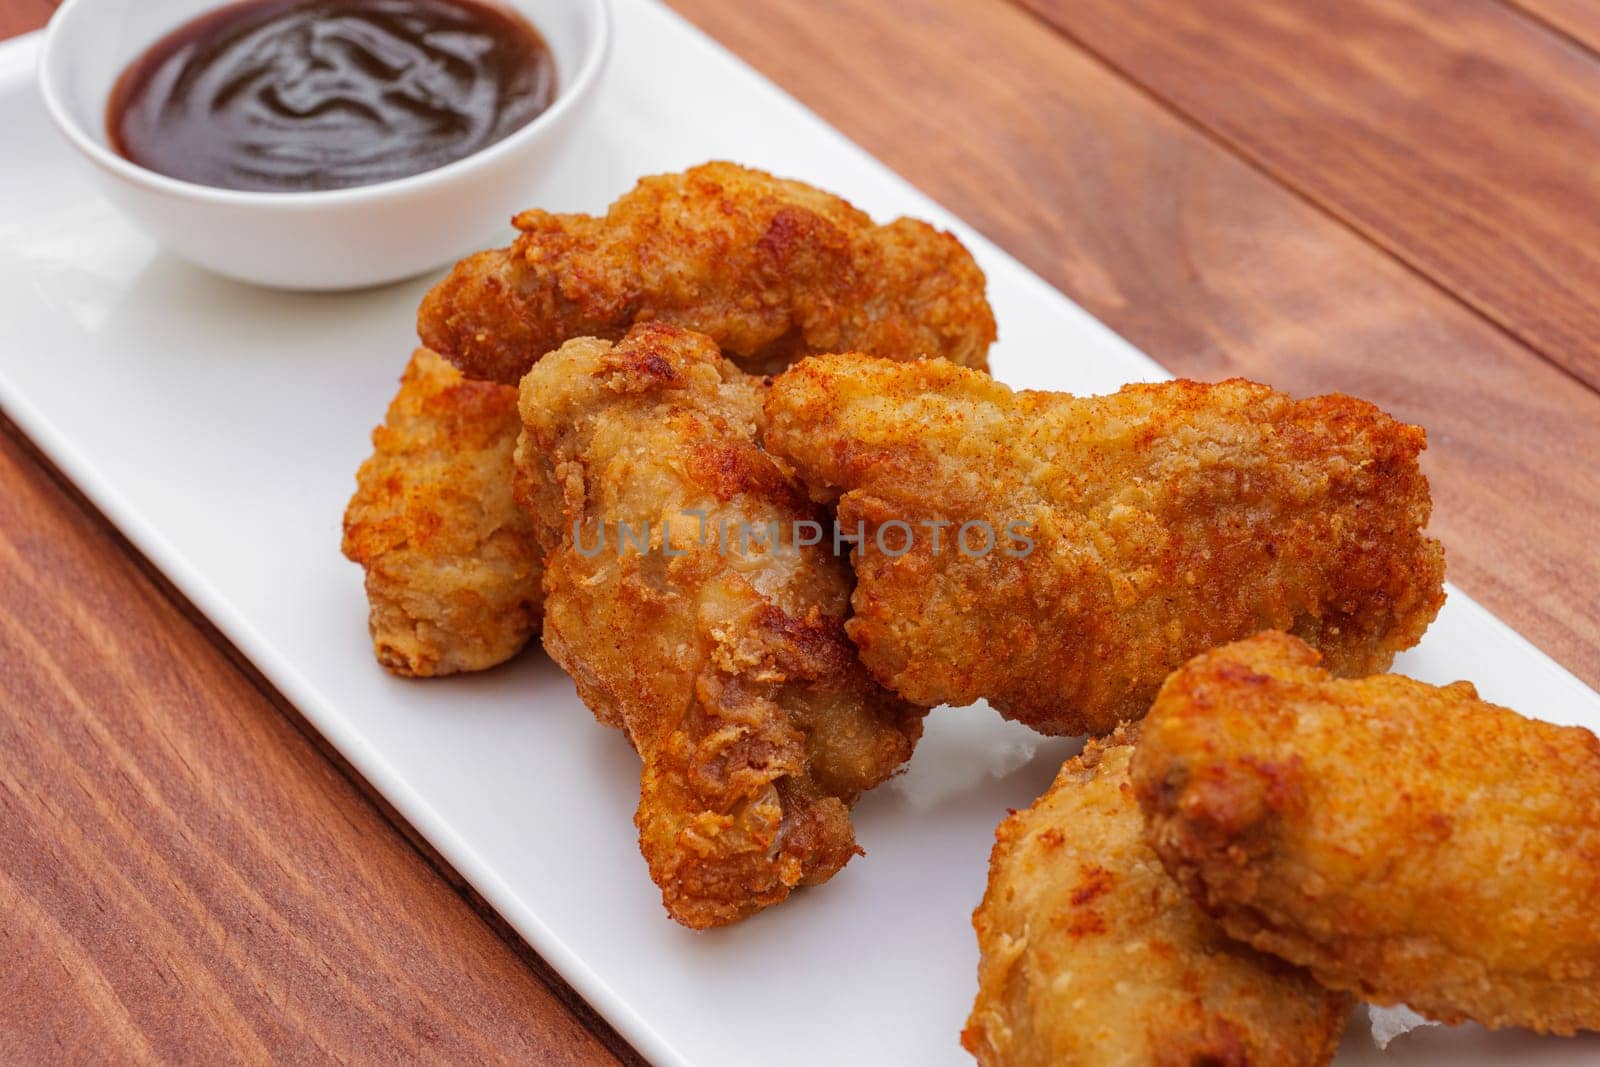 Fried chicken wings with barbeque sauce. Breaded Crispy fried chicken on wooden table. Deep fried food